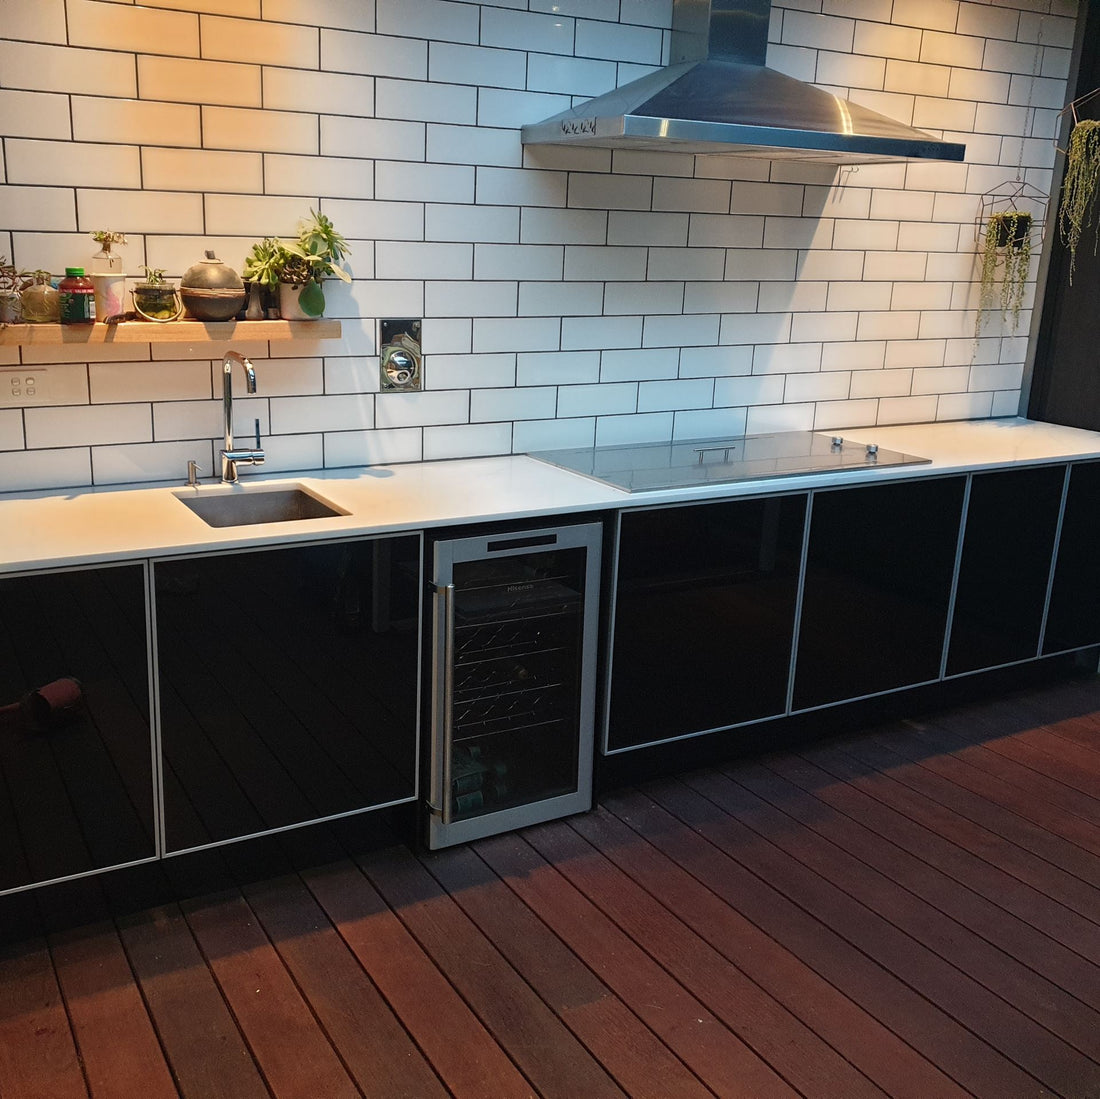 Top Tips to Consider When Building an Outdoor Kitchen